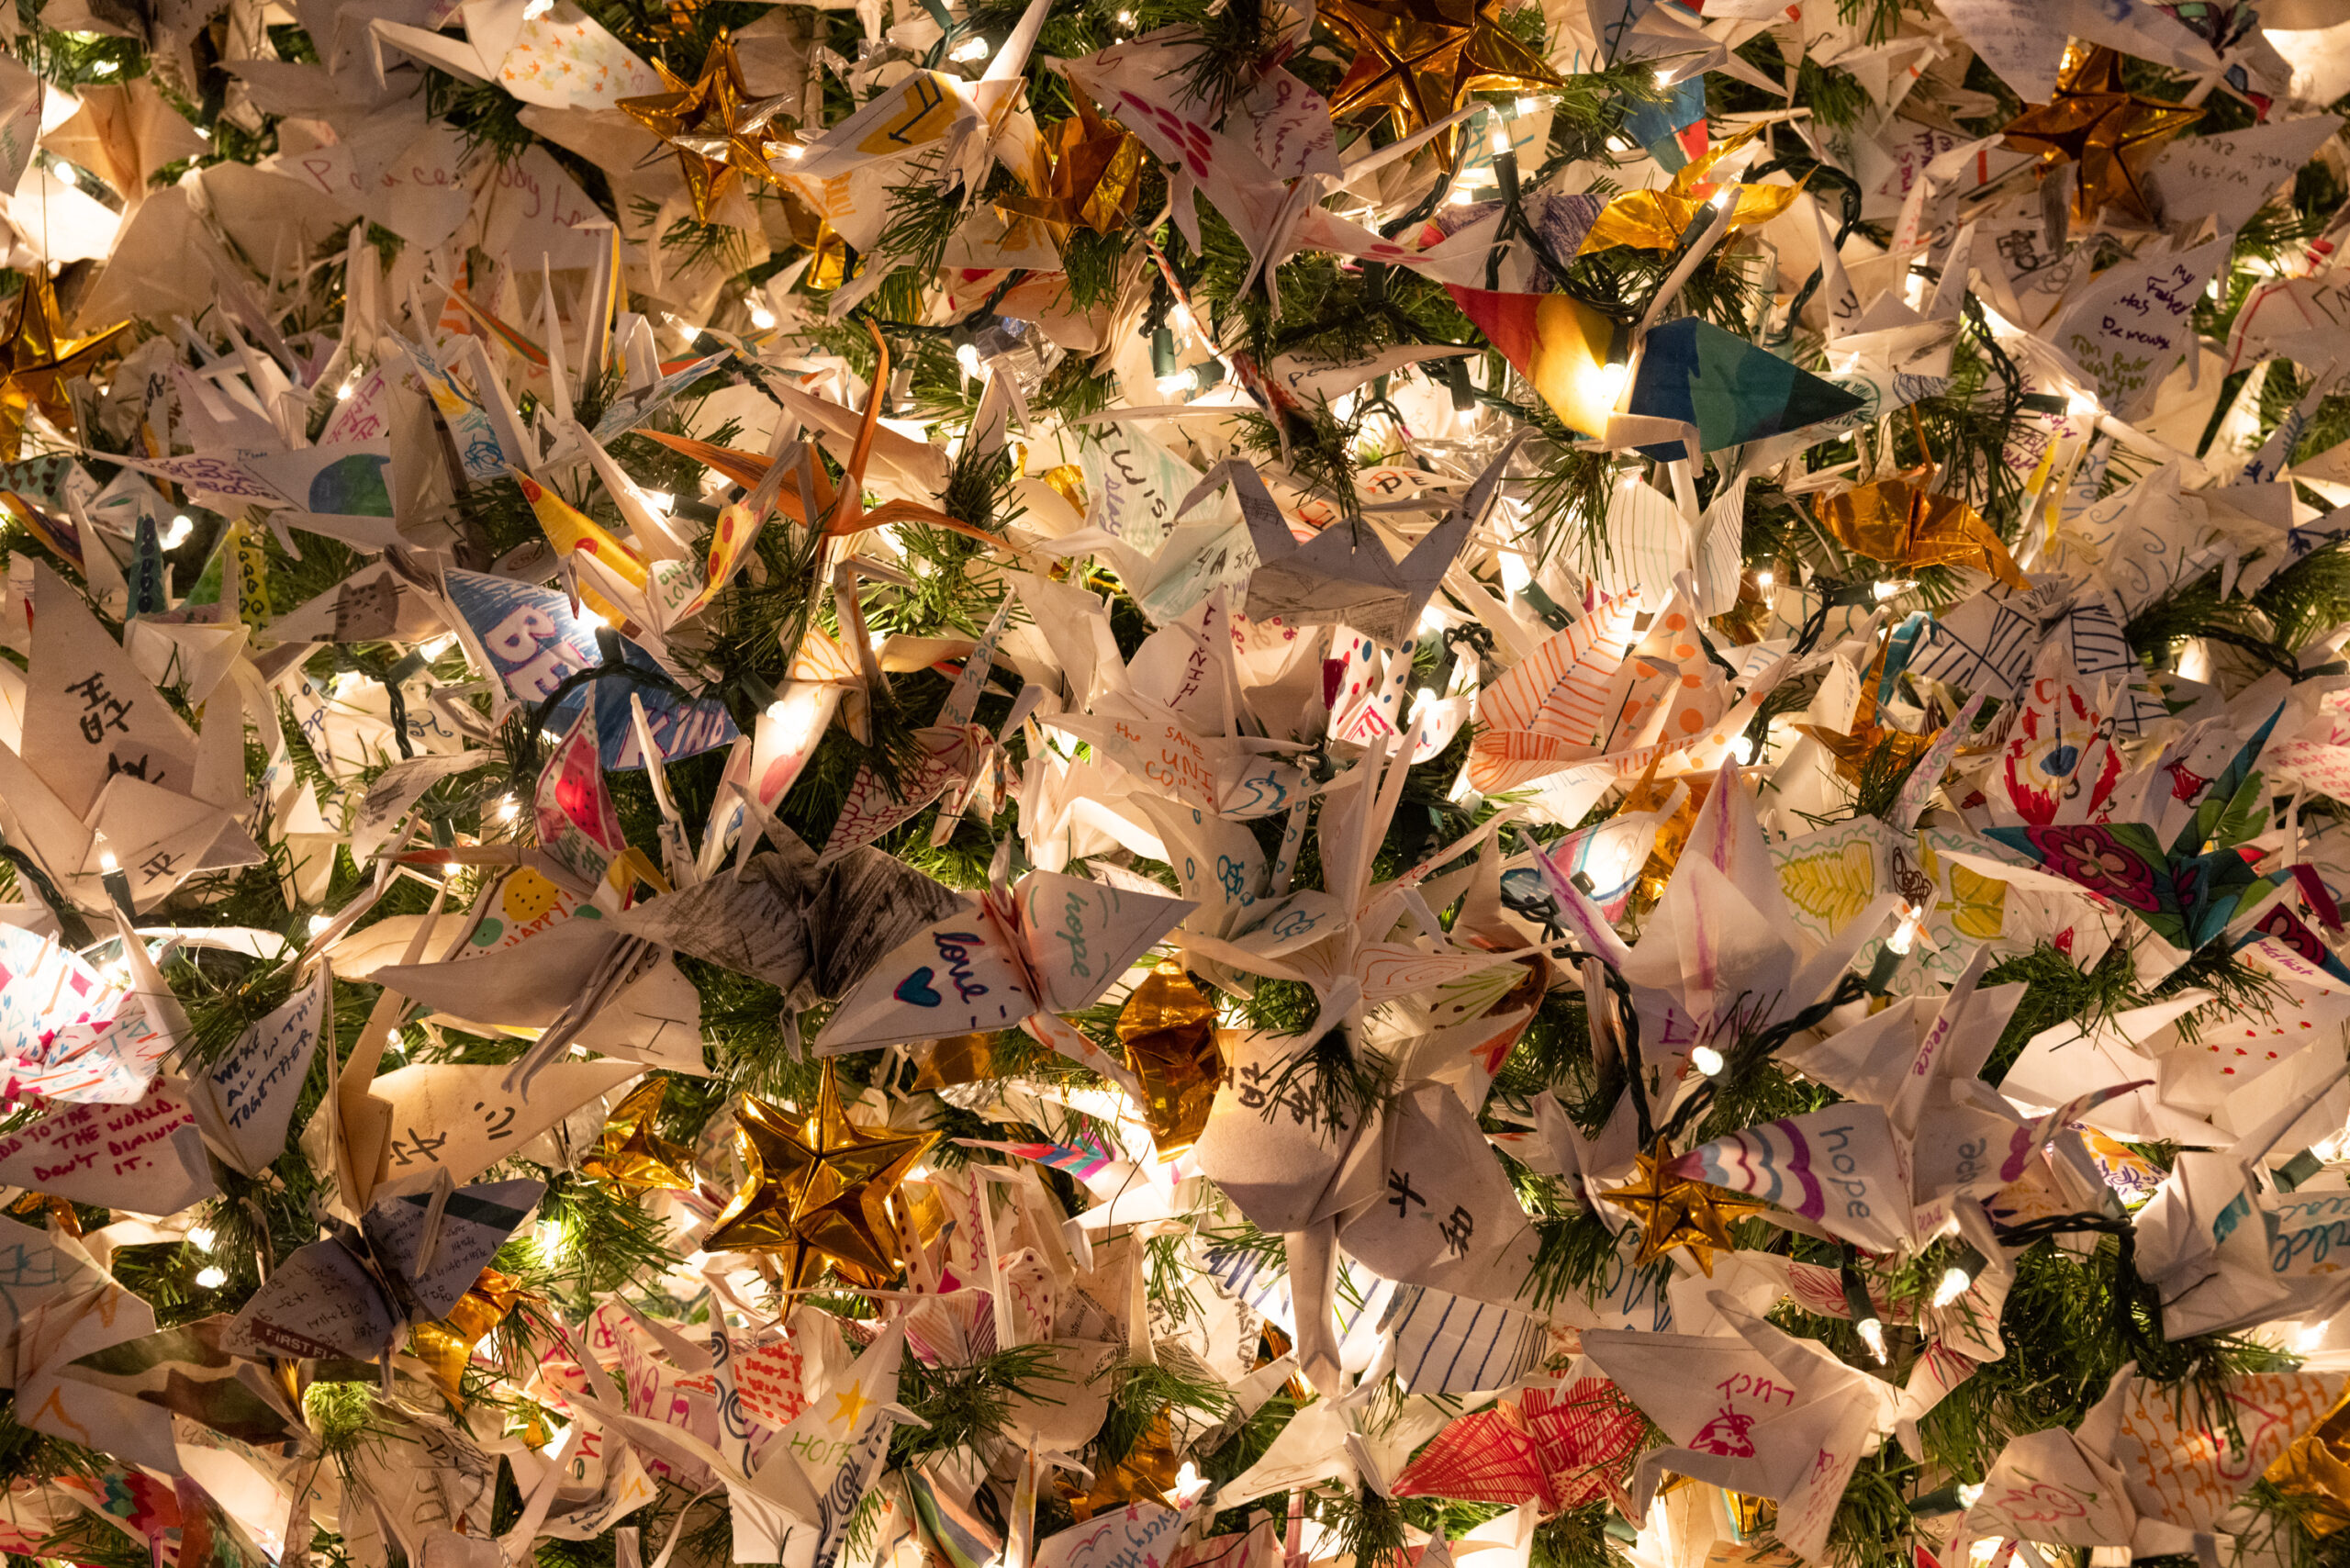 A close-up photo shows a portion of the 10,000 illuminated origami paper cranes make up Grace Cathedral's &quot;World Tree of Hope.&quot;